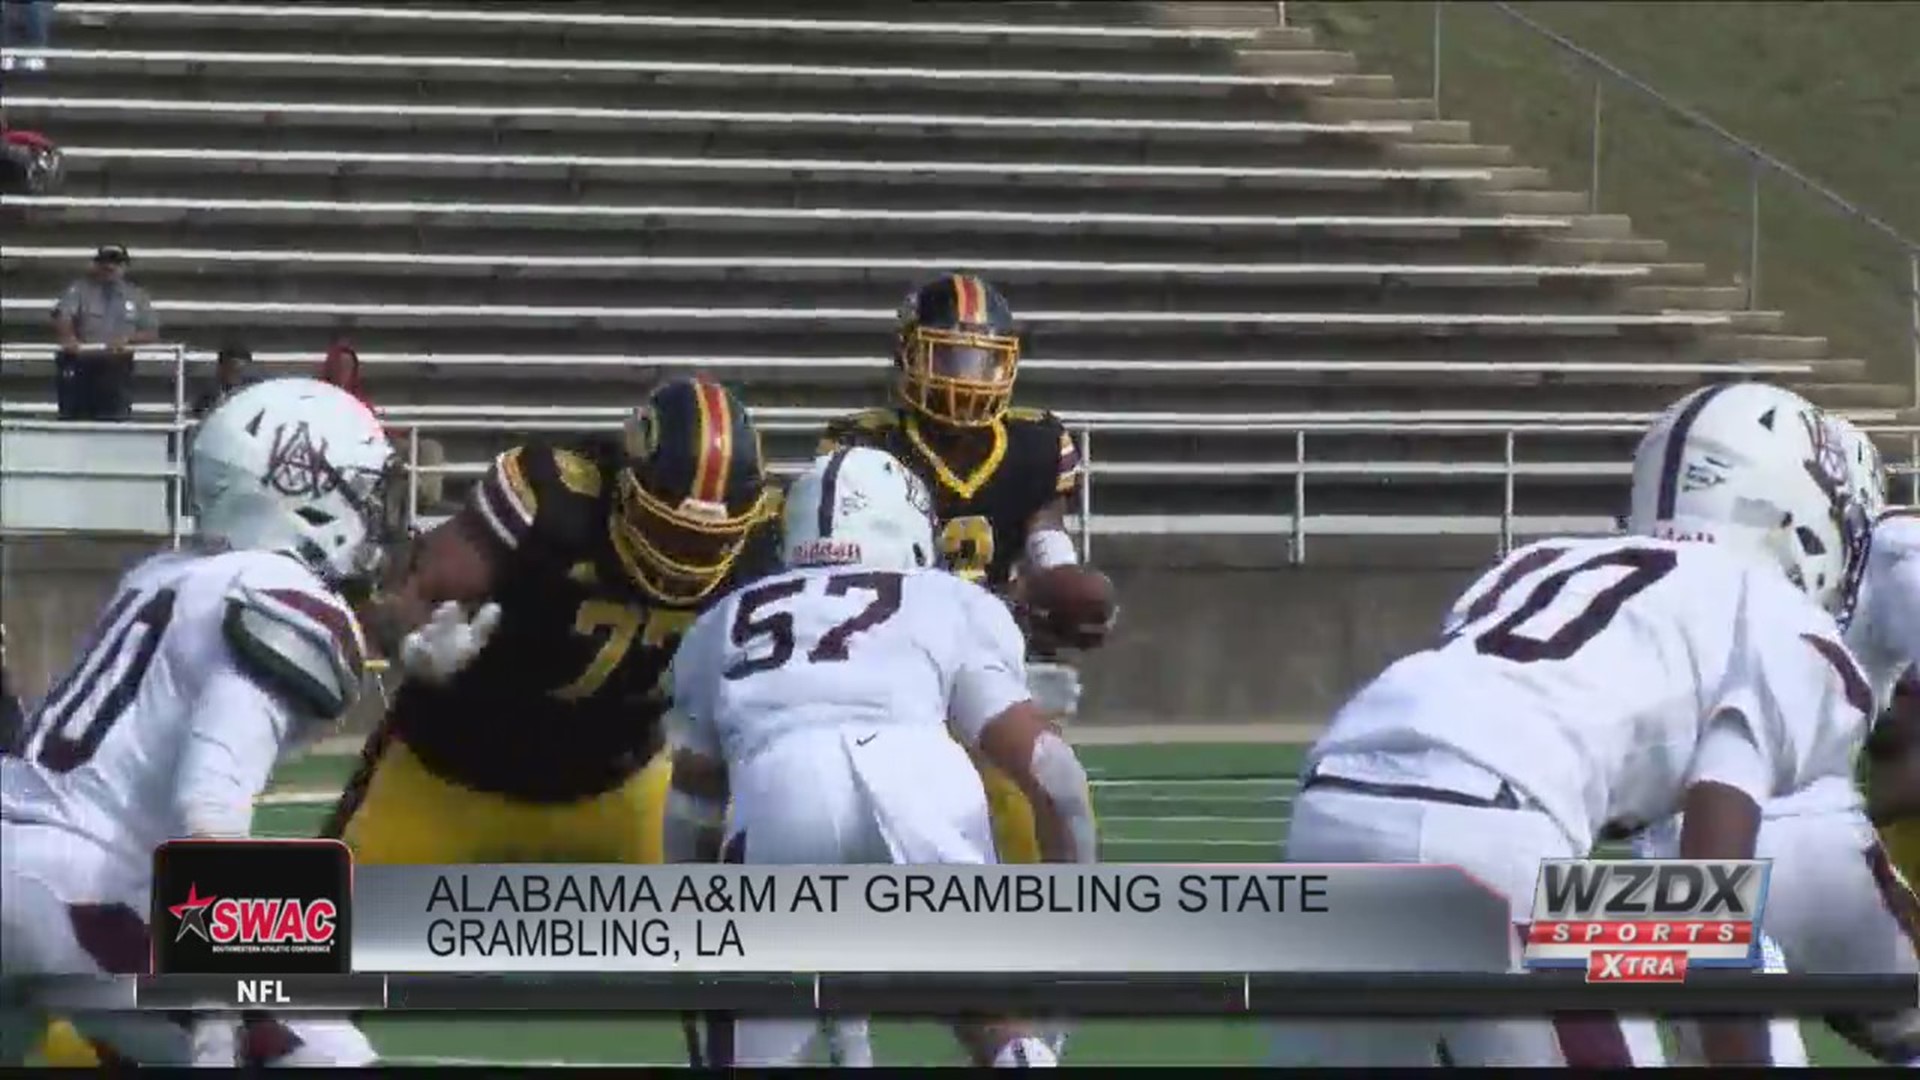 Jakarie Nichols gave Grambling the lead on a TD run with 2:11 left and Koby Foster secured the win with a fumble recovery returned for a touchdown with 52 seconds left as the Tigers beat Alabama A&M 23-10 on Saturday.